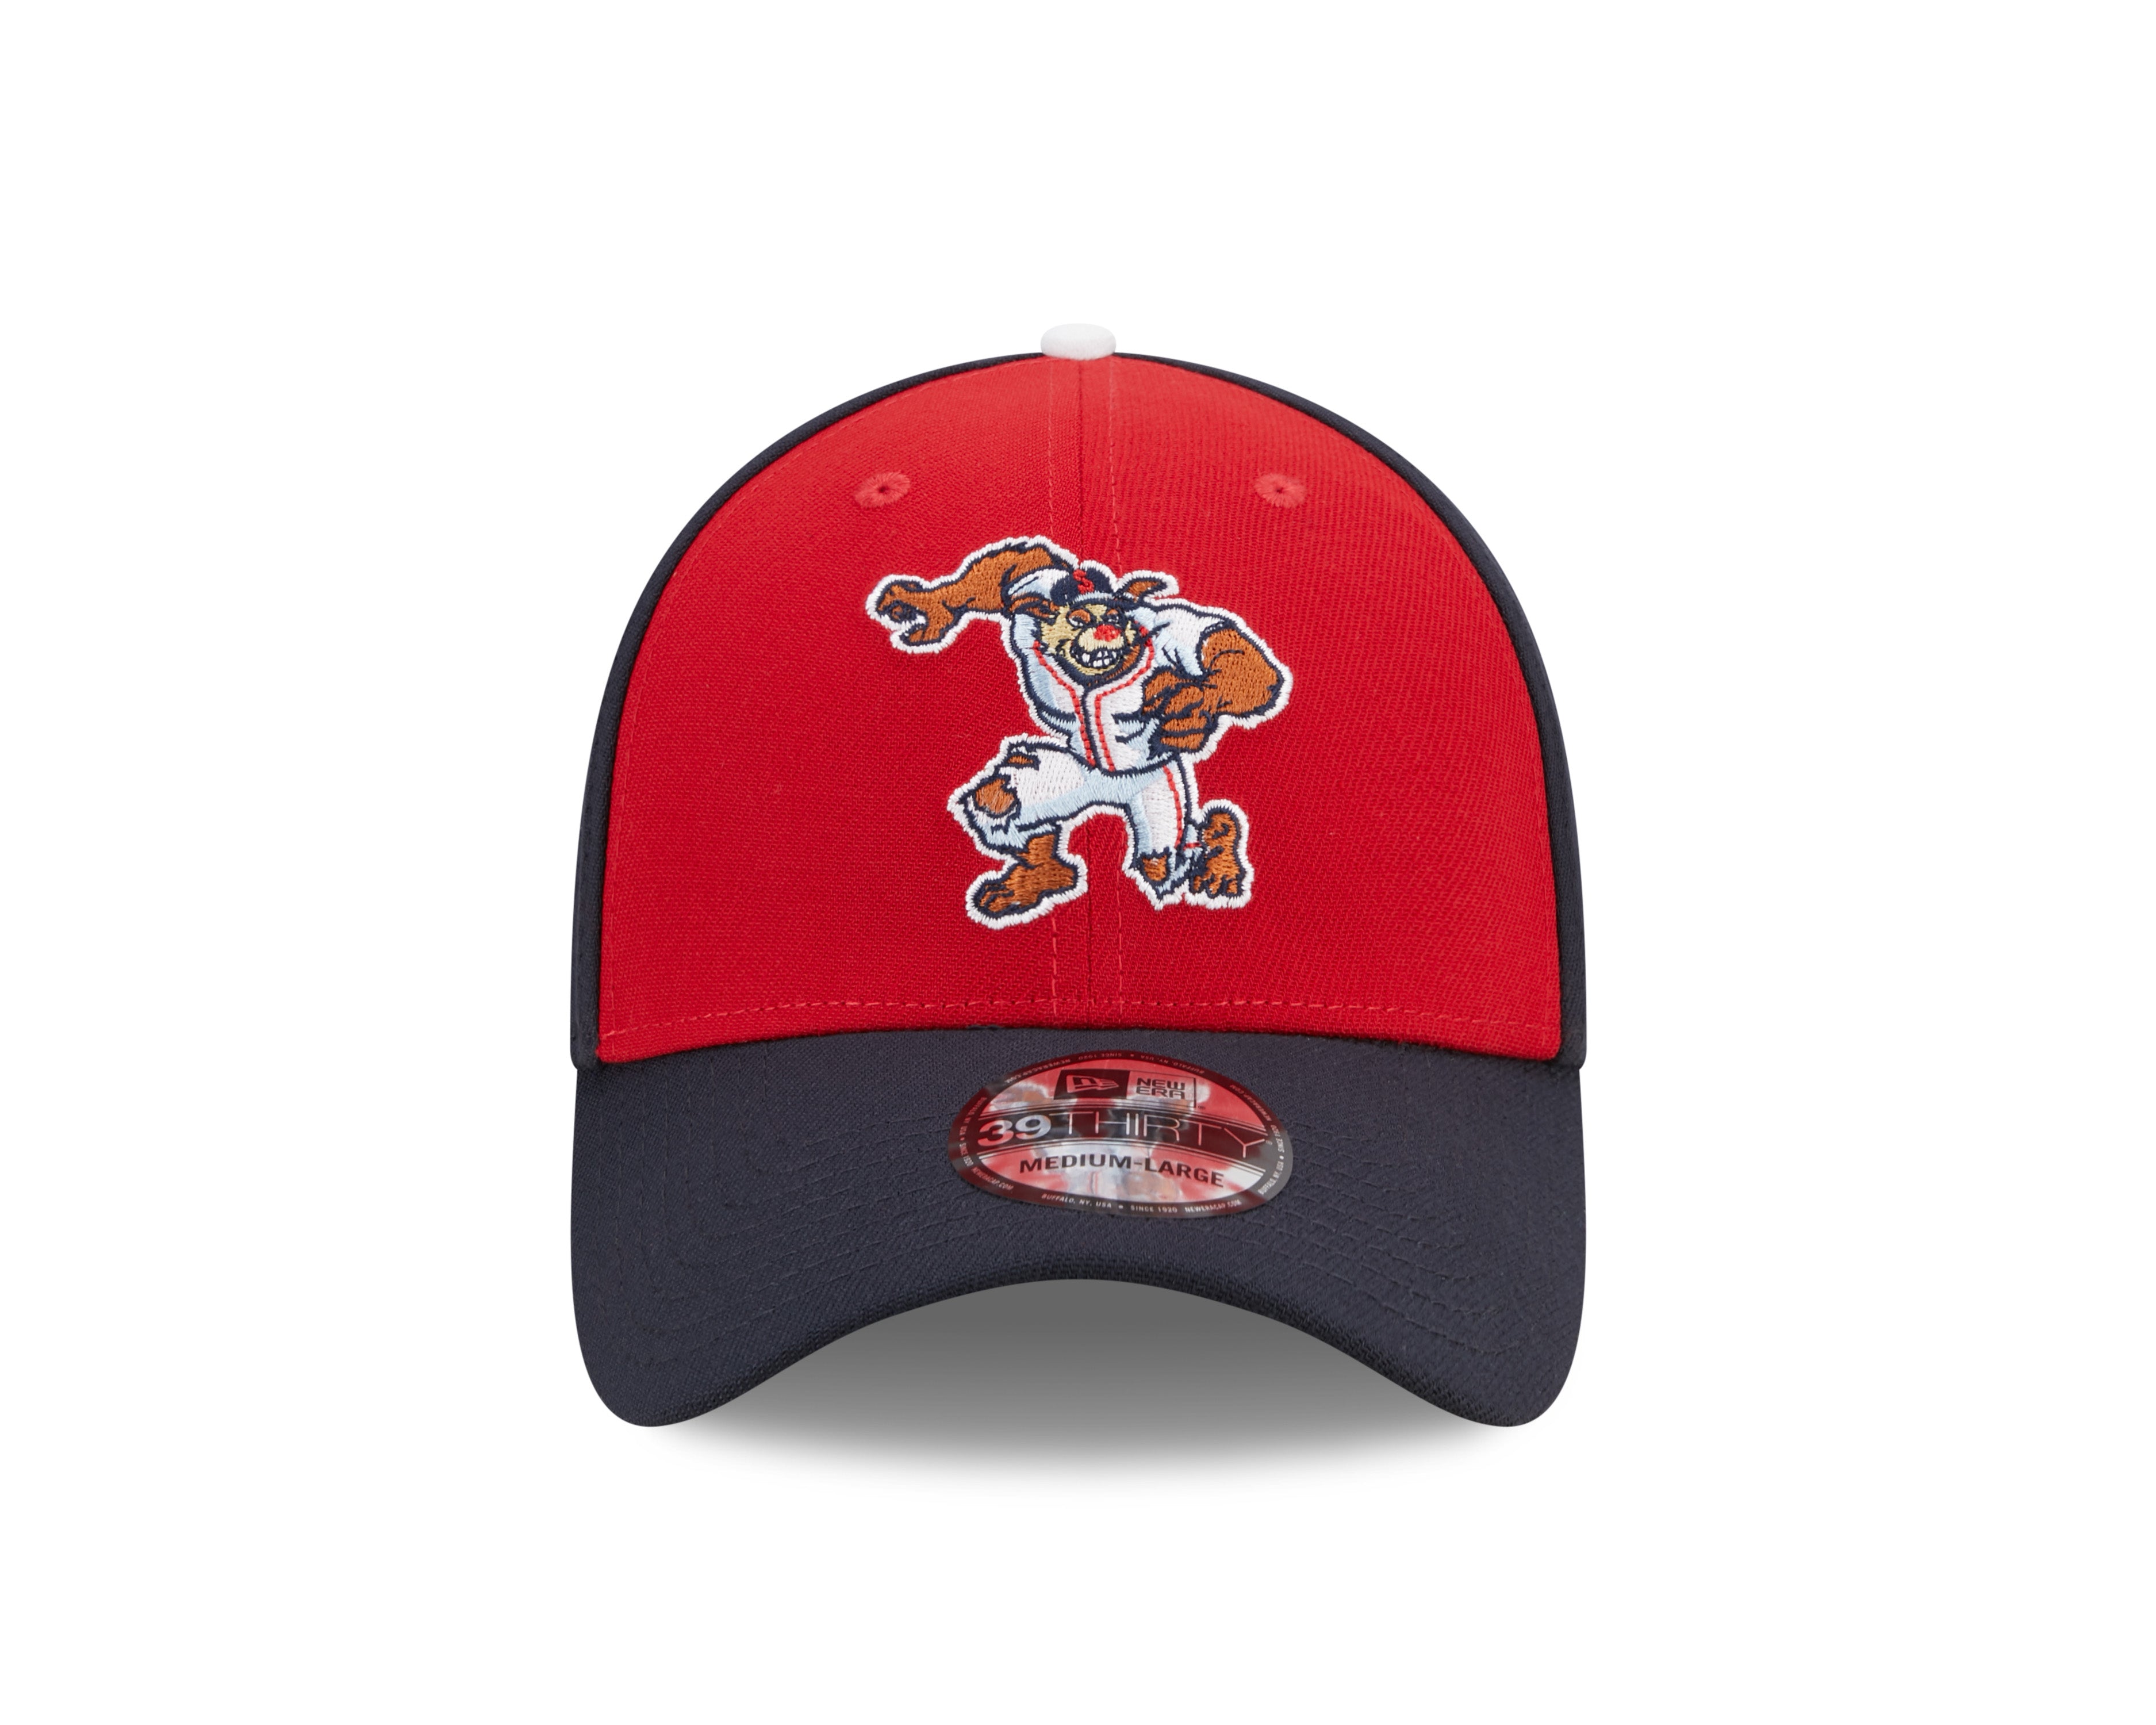 New Era Boston Red Sox Hats in Boston Red Sox Team Shop